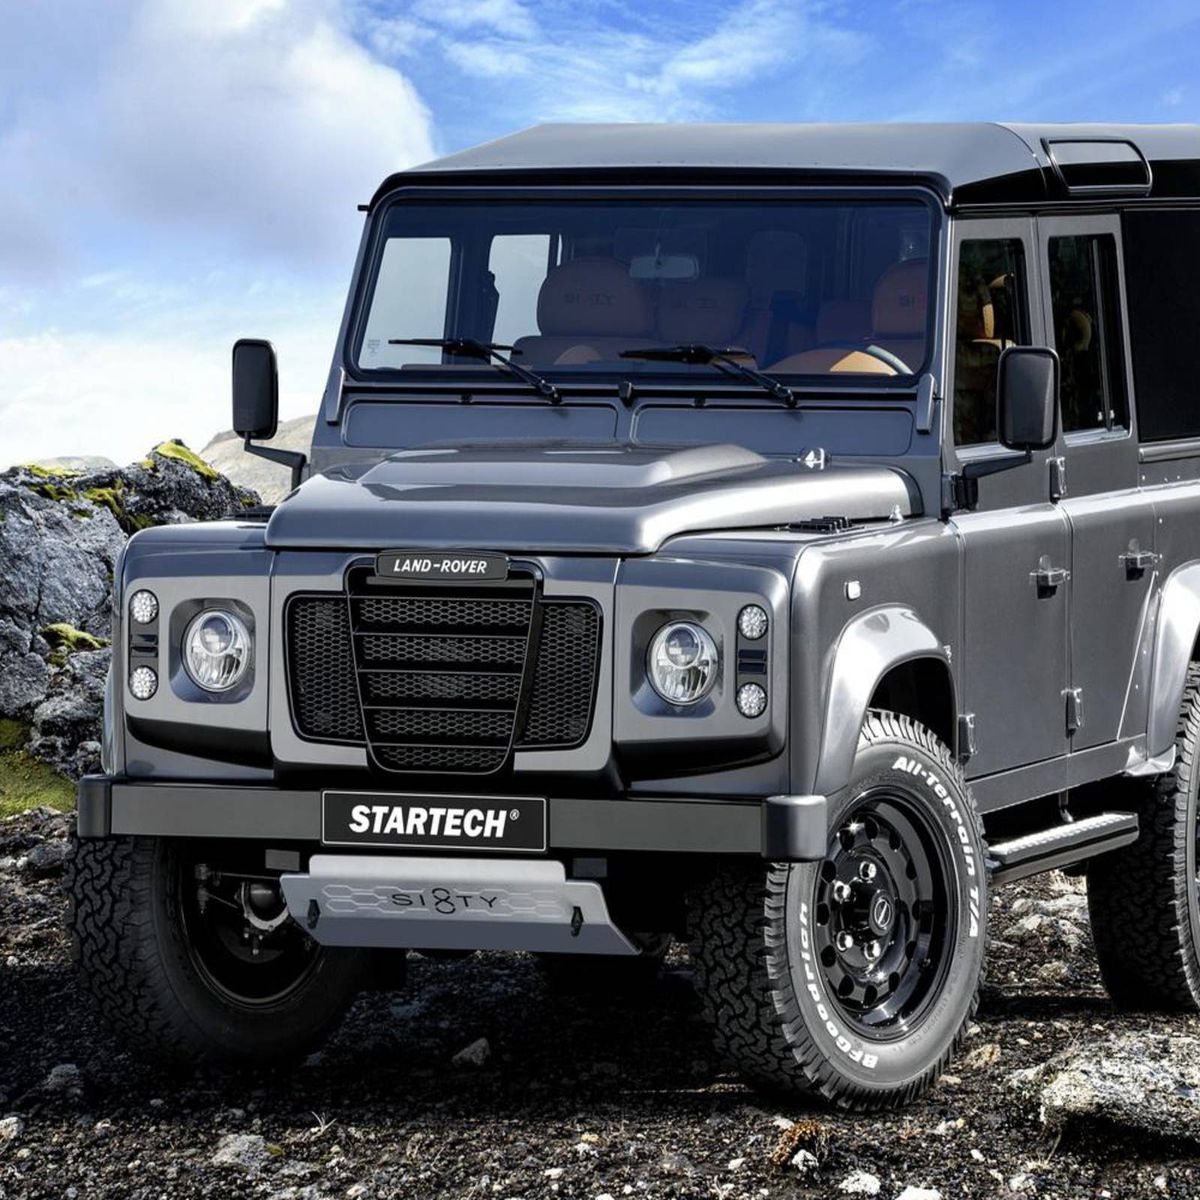 Trasco's Armored Defender 110 Reports for Duty